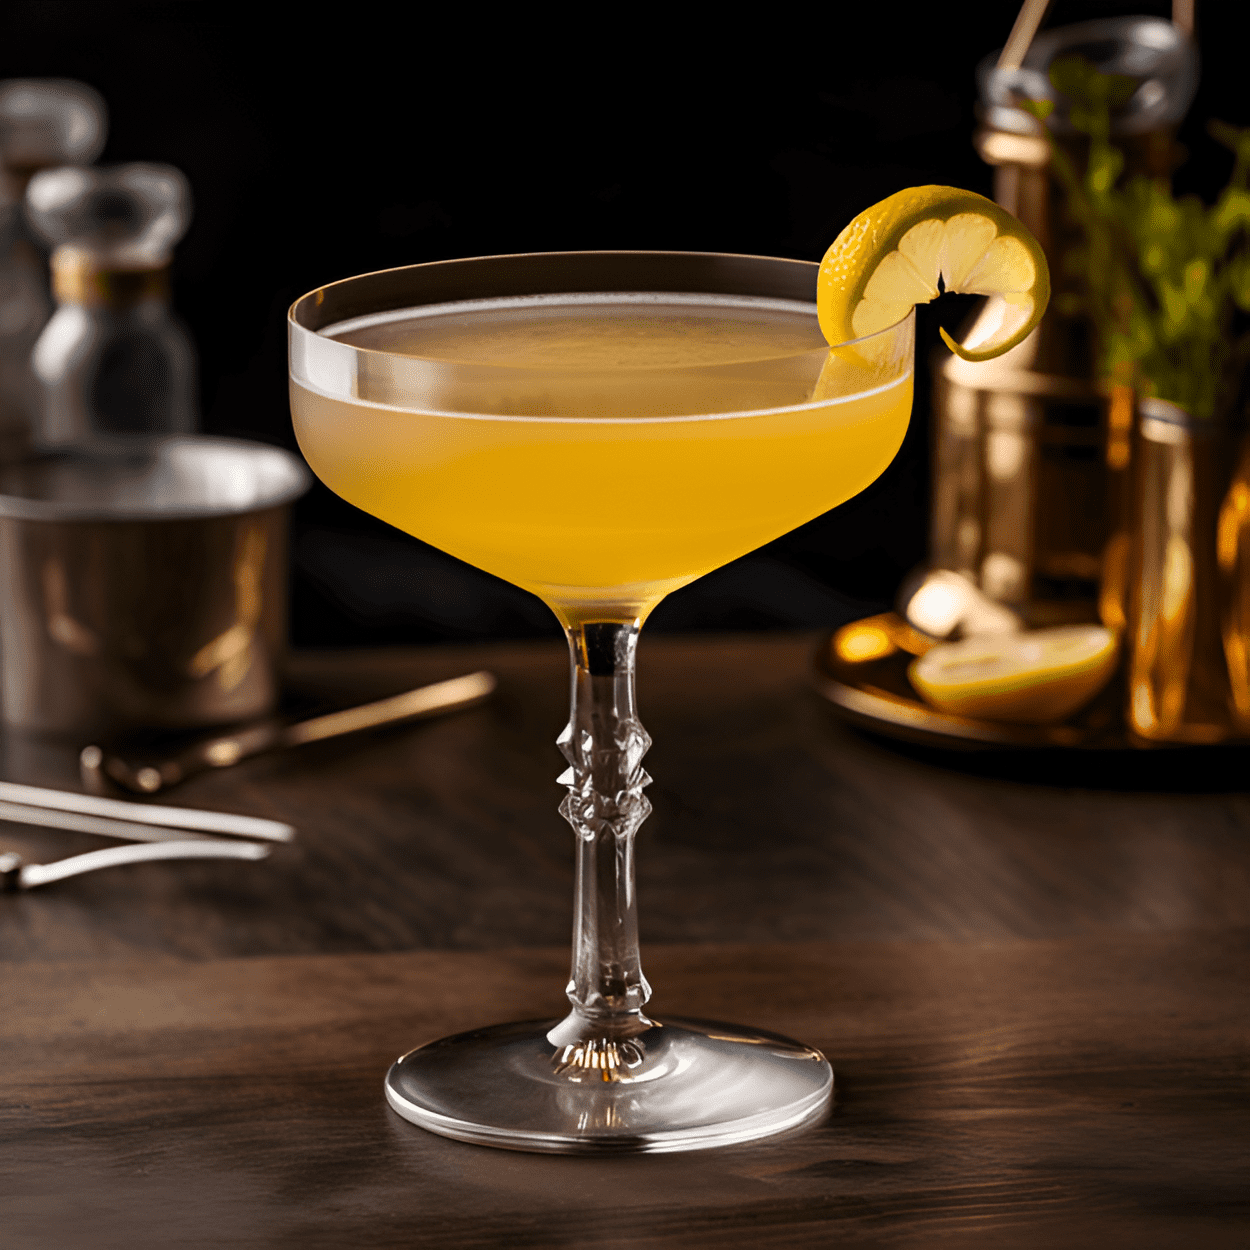 Boomer Recipe - The Boomer cocktail is a harmonious blend of strong, sweet, and sour. The robust flavor of bourbon is beautifully balanced with the sweetness of honey and the tartness of fresh lemon juice. It's a strong, yet smooth cocktail with a hint of sweetness.